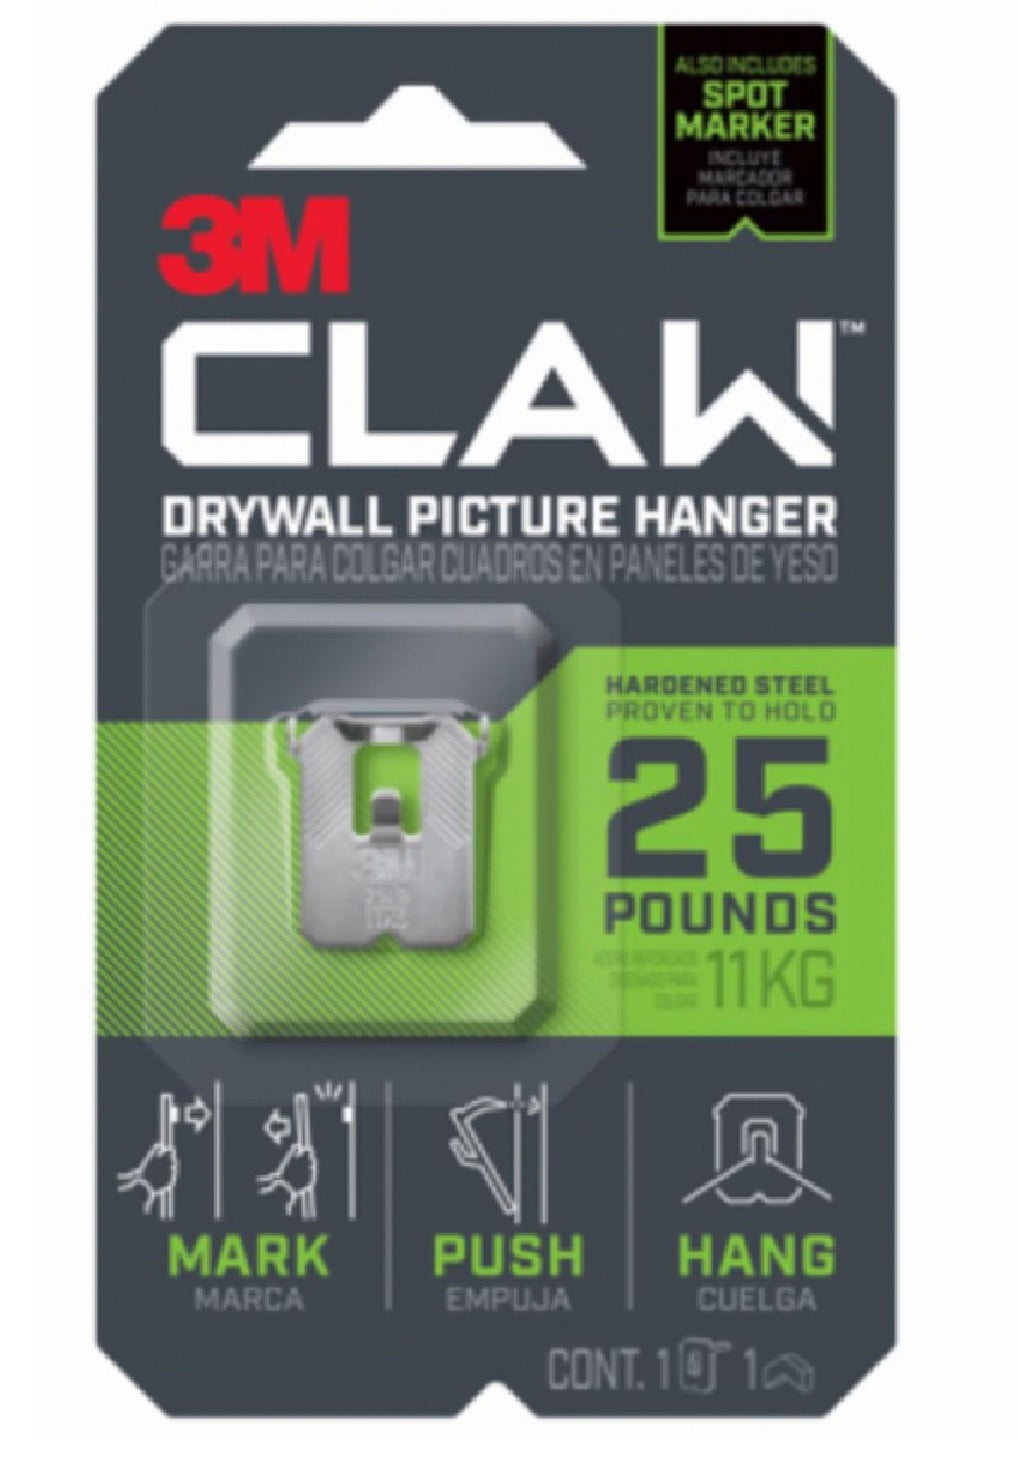 3M 3PH25M-1ES CLAW Drywall Picture Hanger